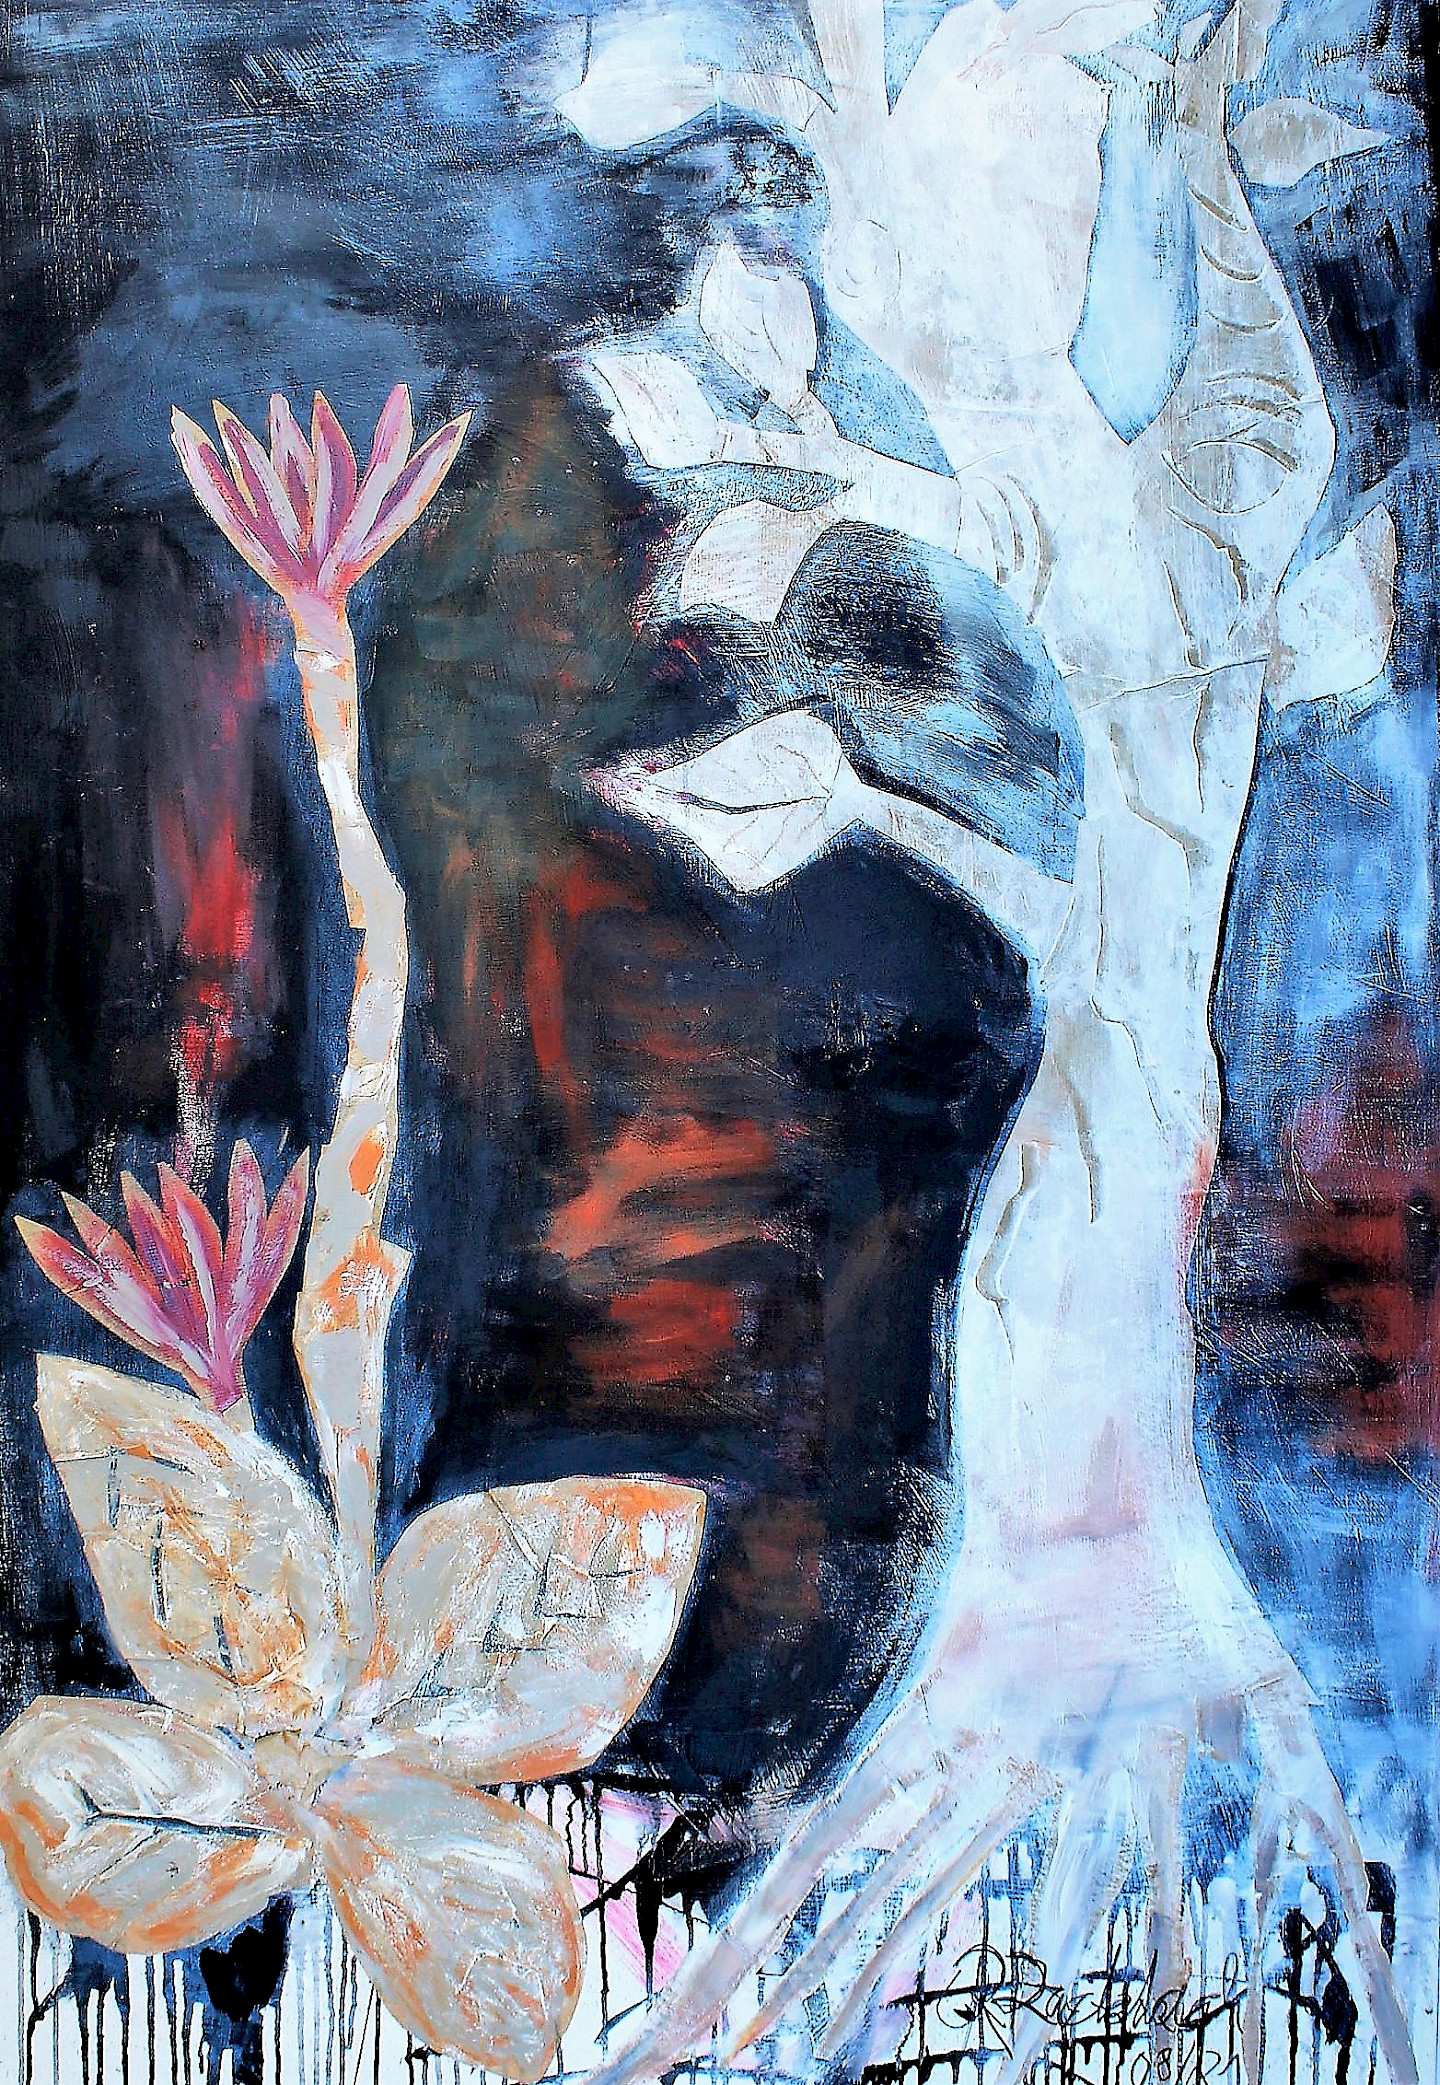 The first plant (Series GENESIS) Rose Zaddach / painting canvas 150x100 Mixed media
From the art book "GENESIS- human and universe" Salon Literatur Publisher Munich 2022